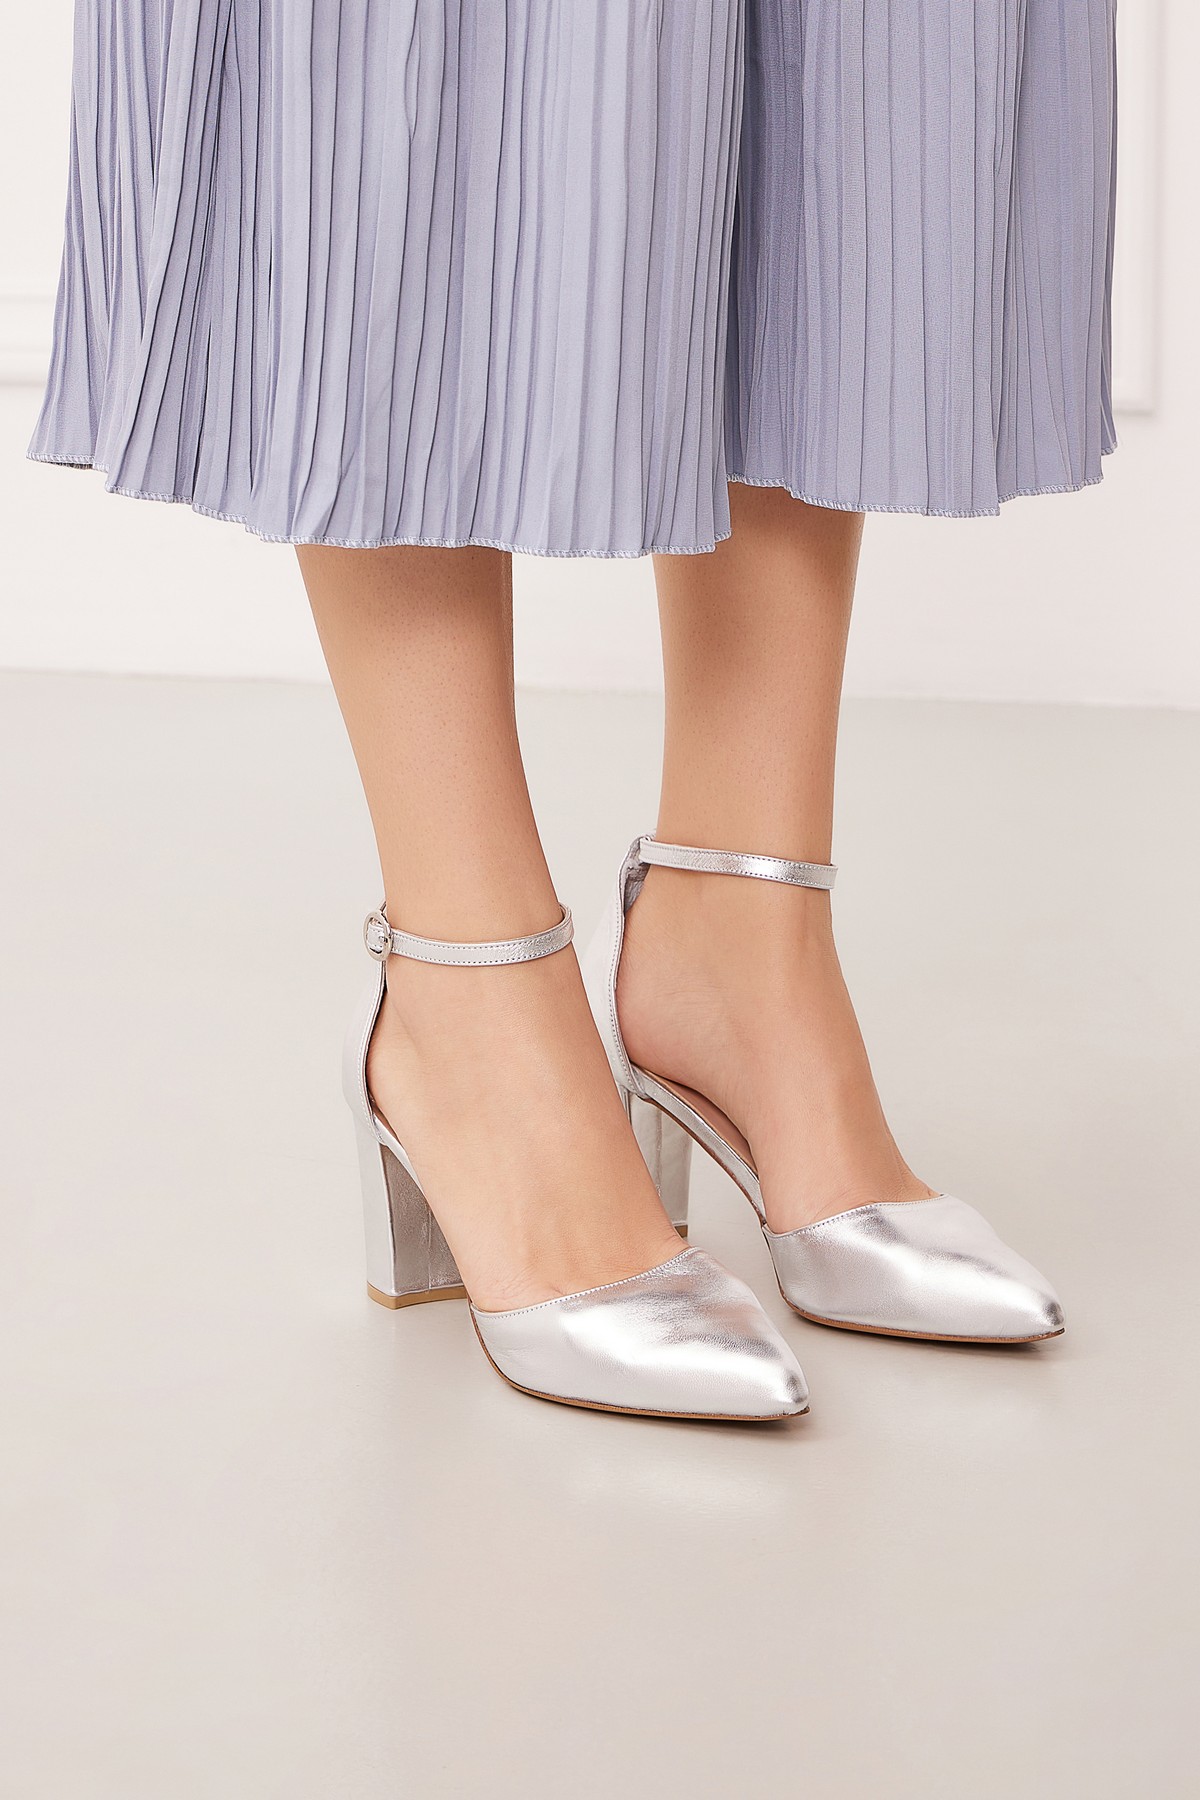 Silver pointy toe shoes with ankle strap